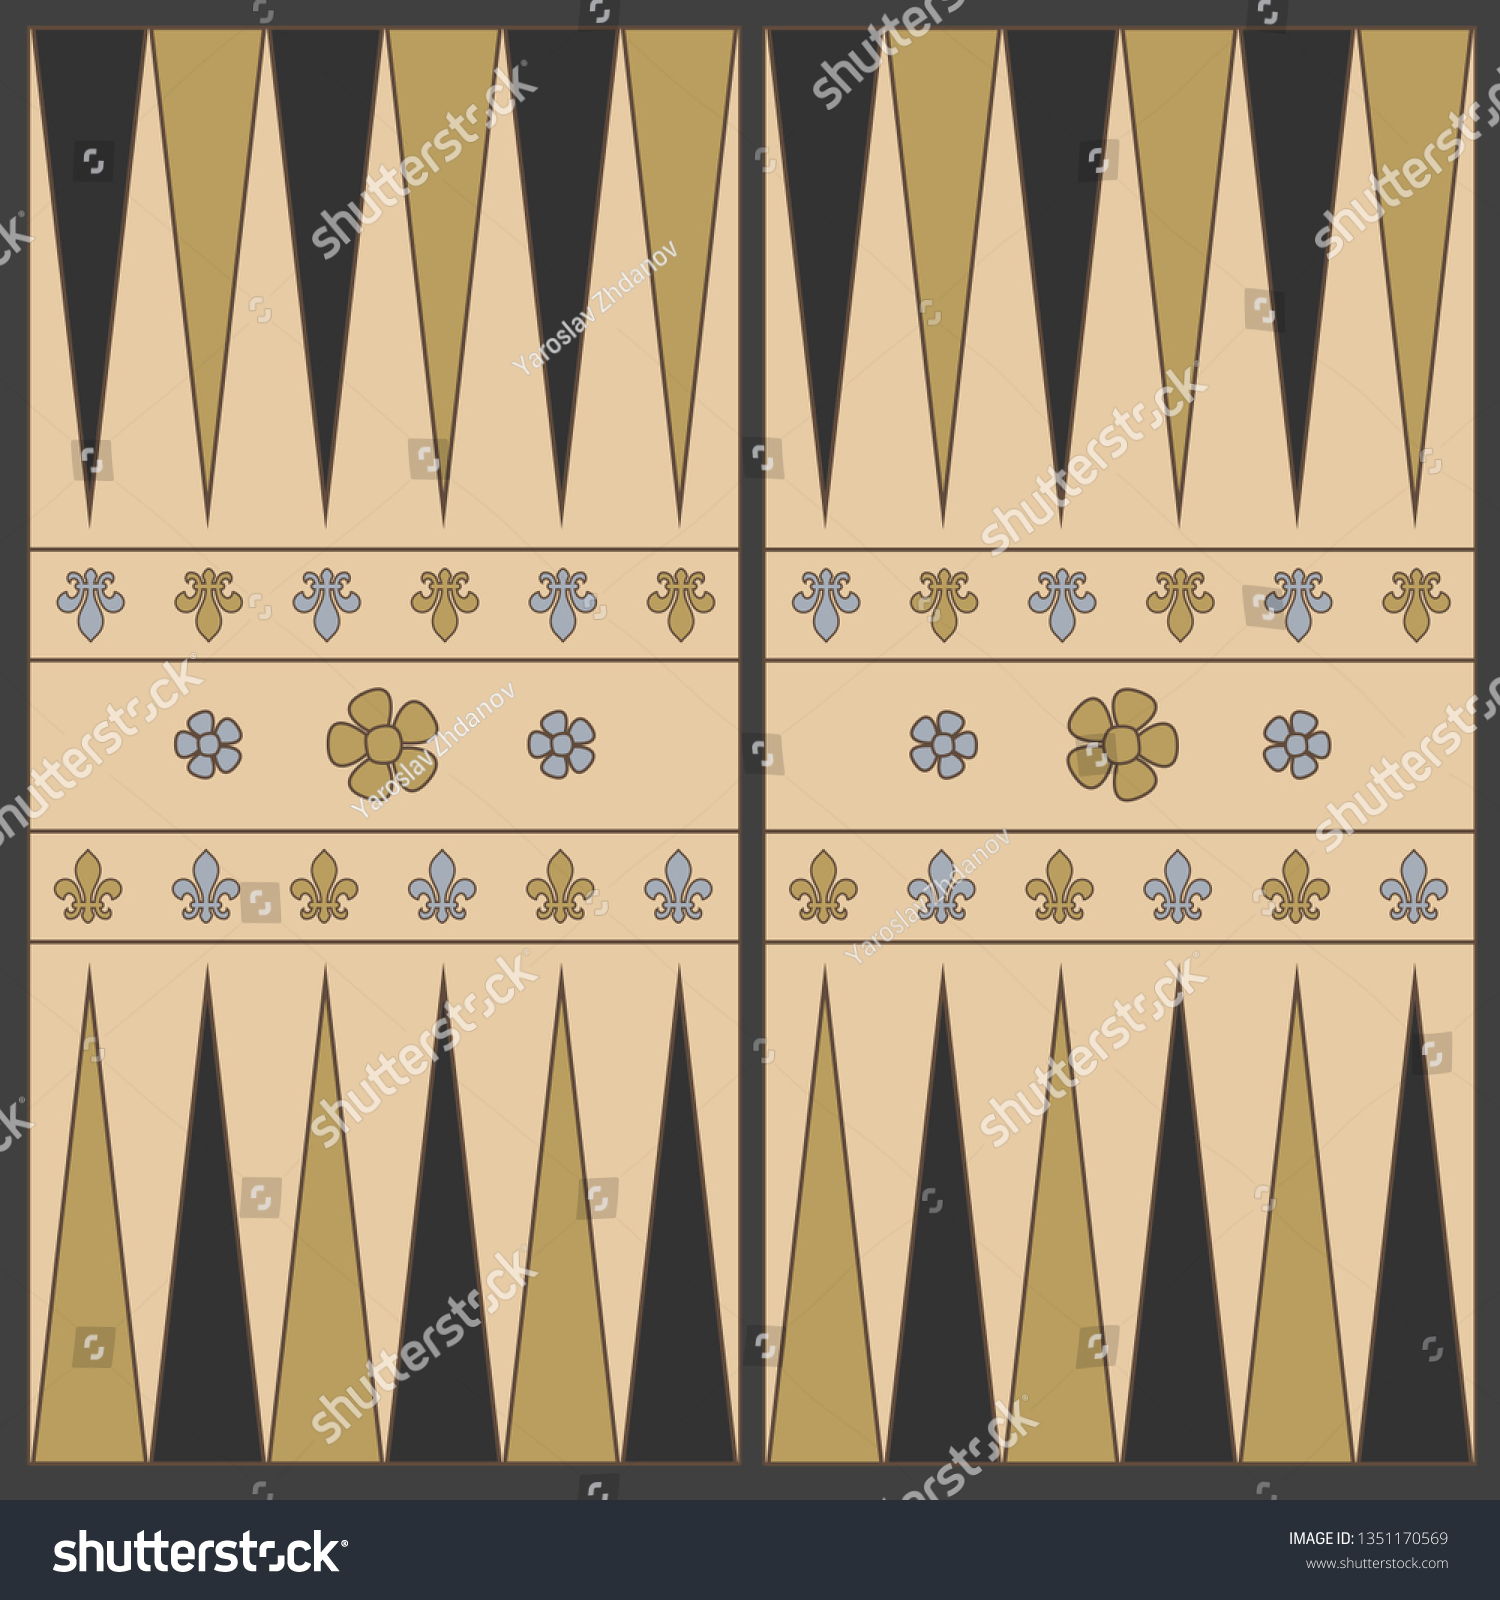 SVG of Backgammon playing field in the medieval style In shades of brown. Vector graphics in flat style. svg